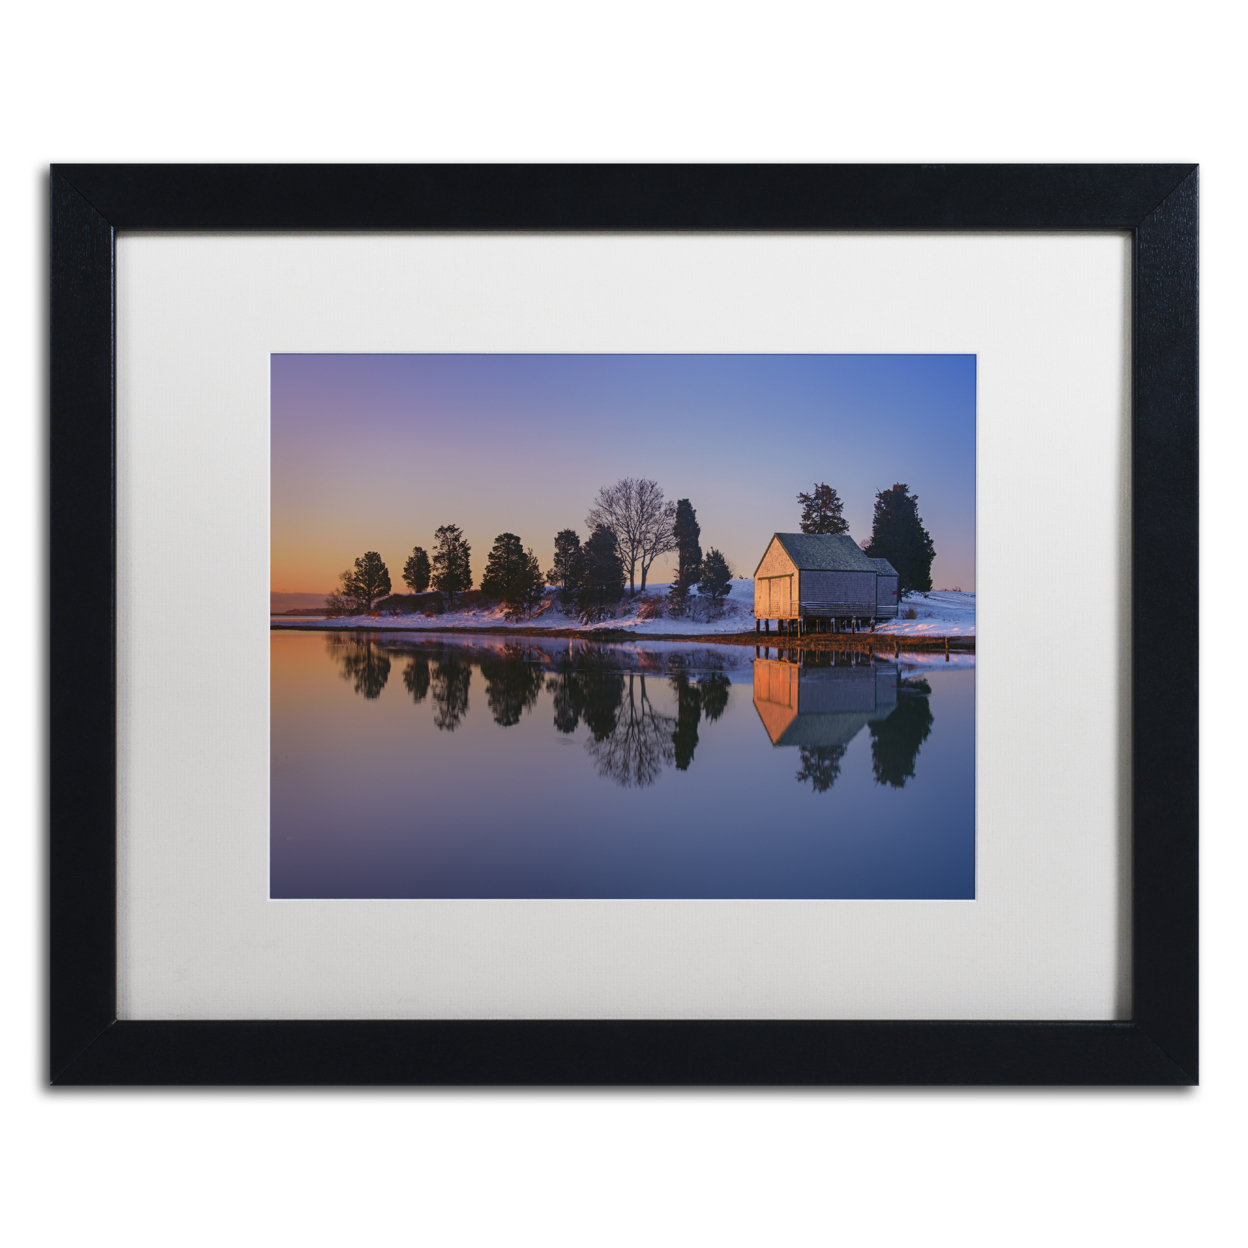 Michael Blanchette Photography 'Winter Reflection' Black Wooden Framed Art 18 X 22 Inches